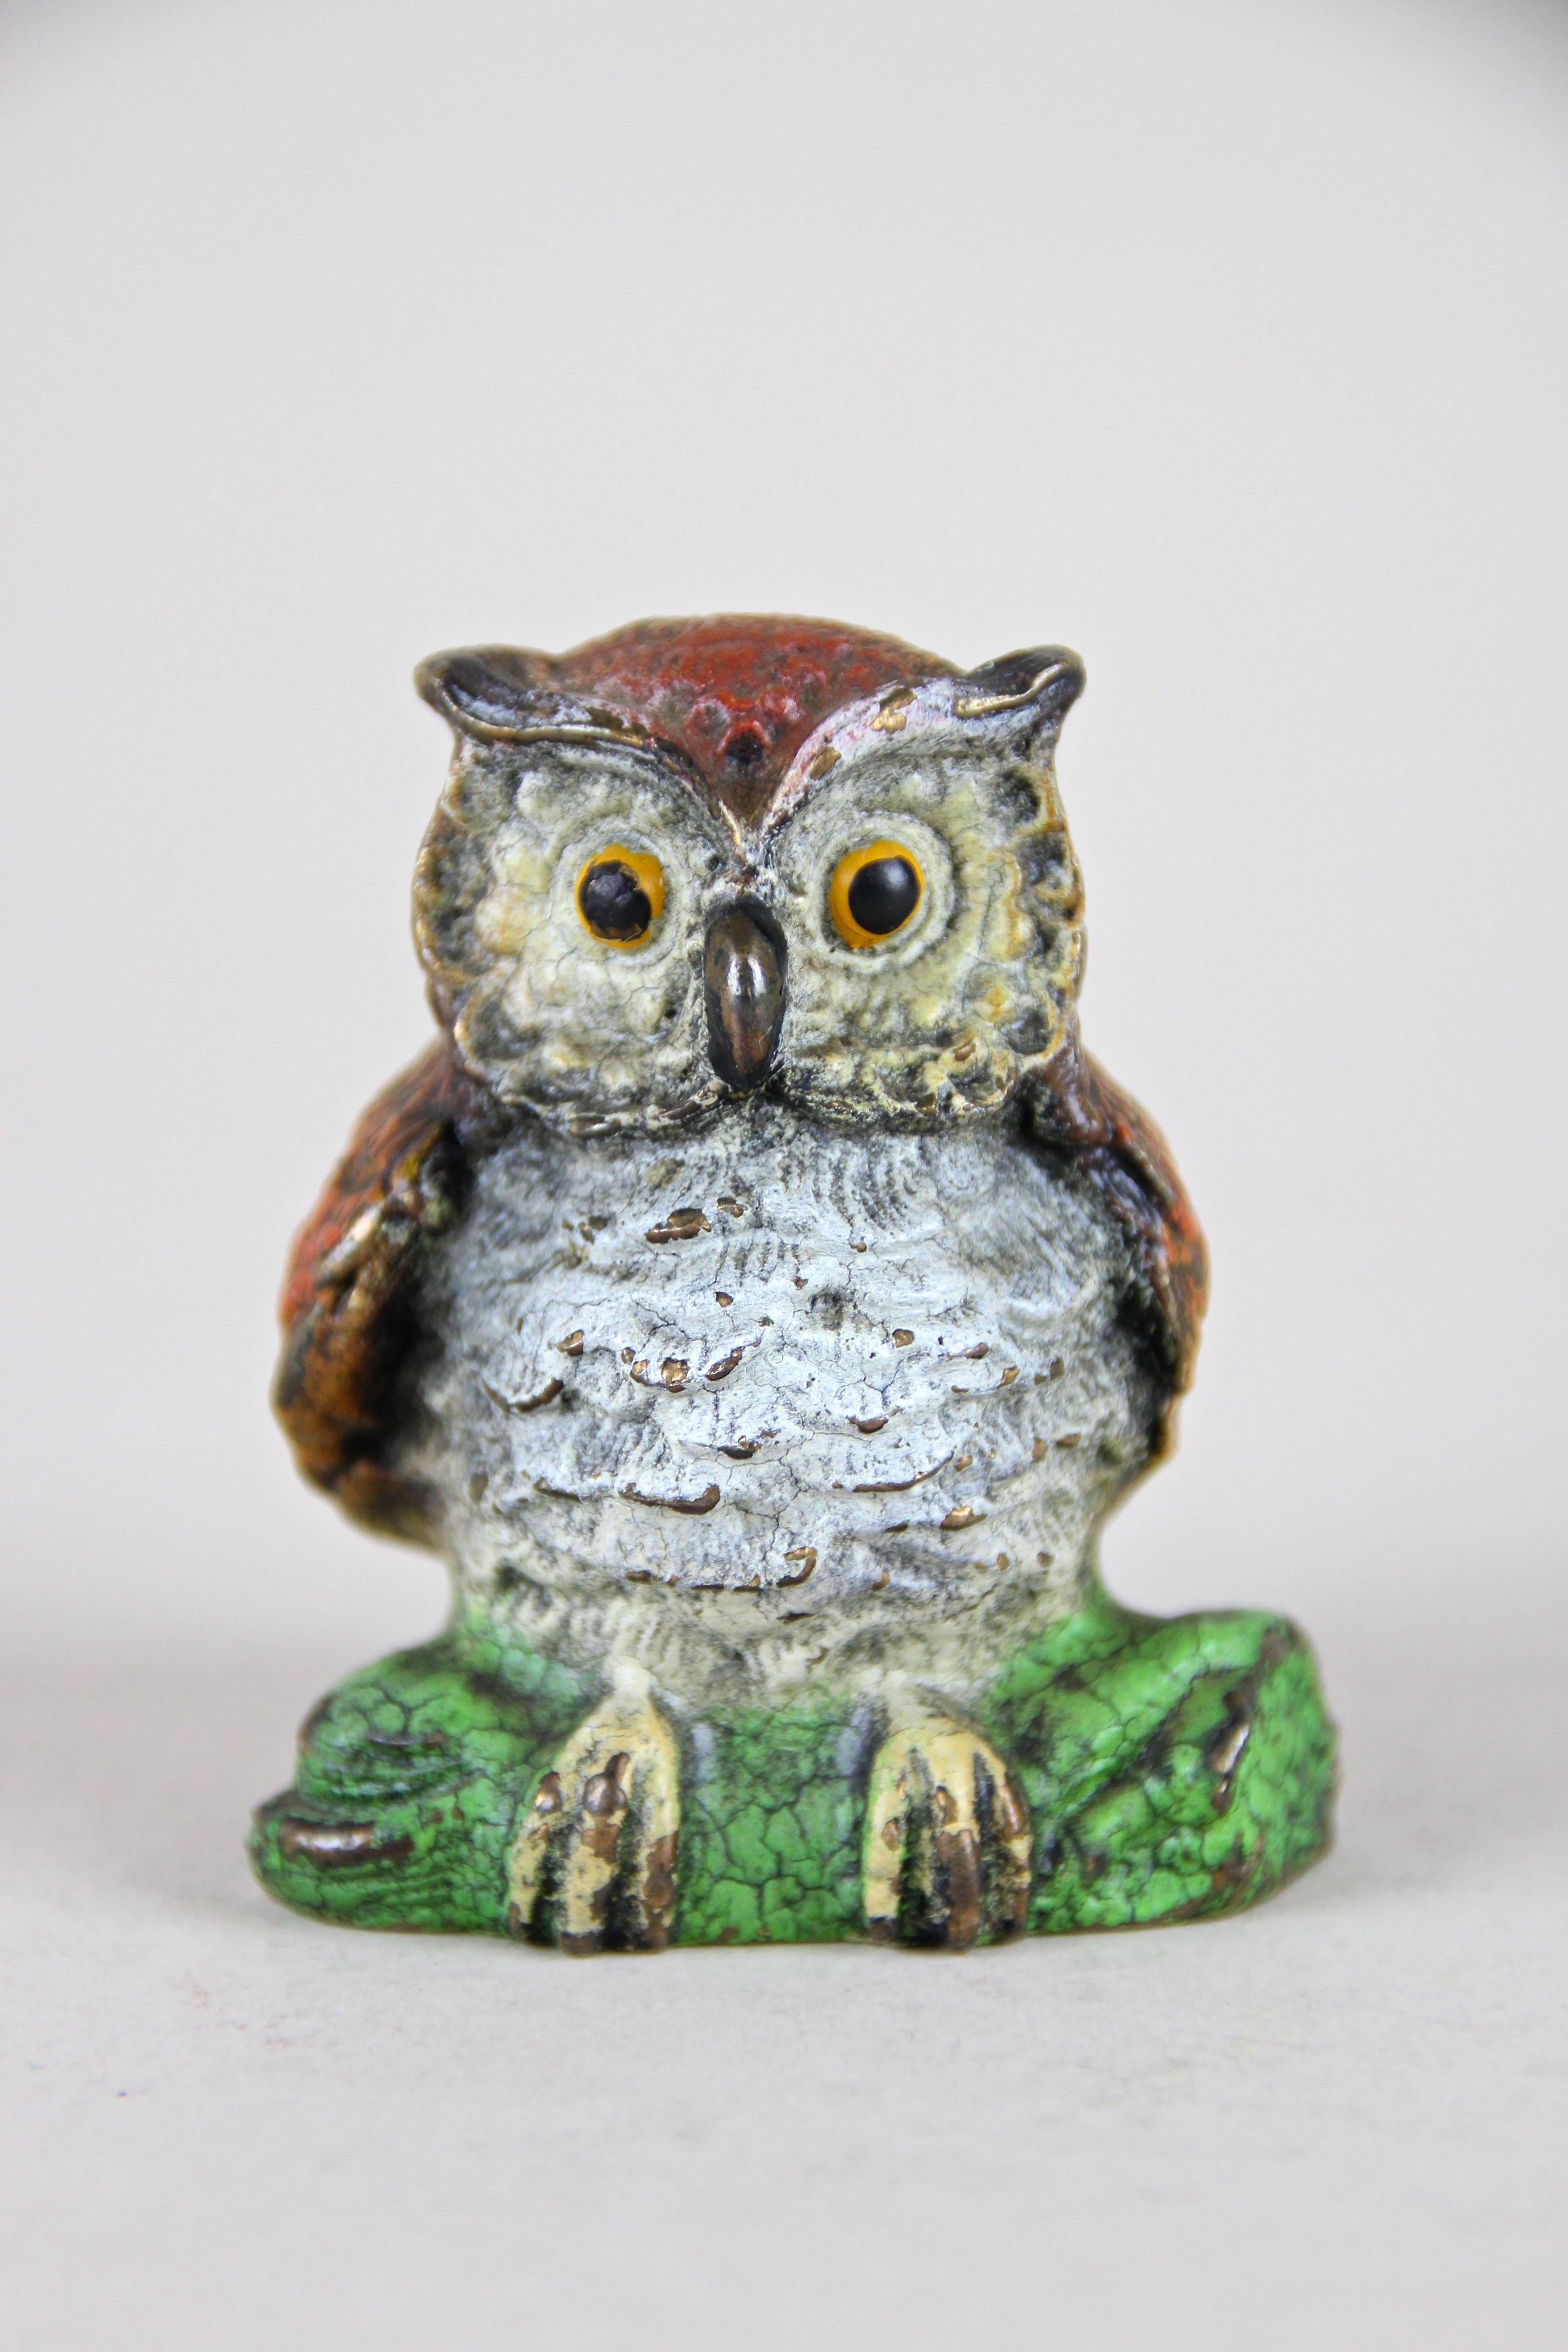 Charming Vienna bronze owl miniature sculpture beautiful painted from the early 20th century in Austria. From circa 1915 this artfully processed solid bronze owl impresses with many detail. Just have a look at the fantastic plumage or the facial